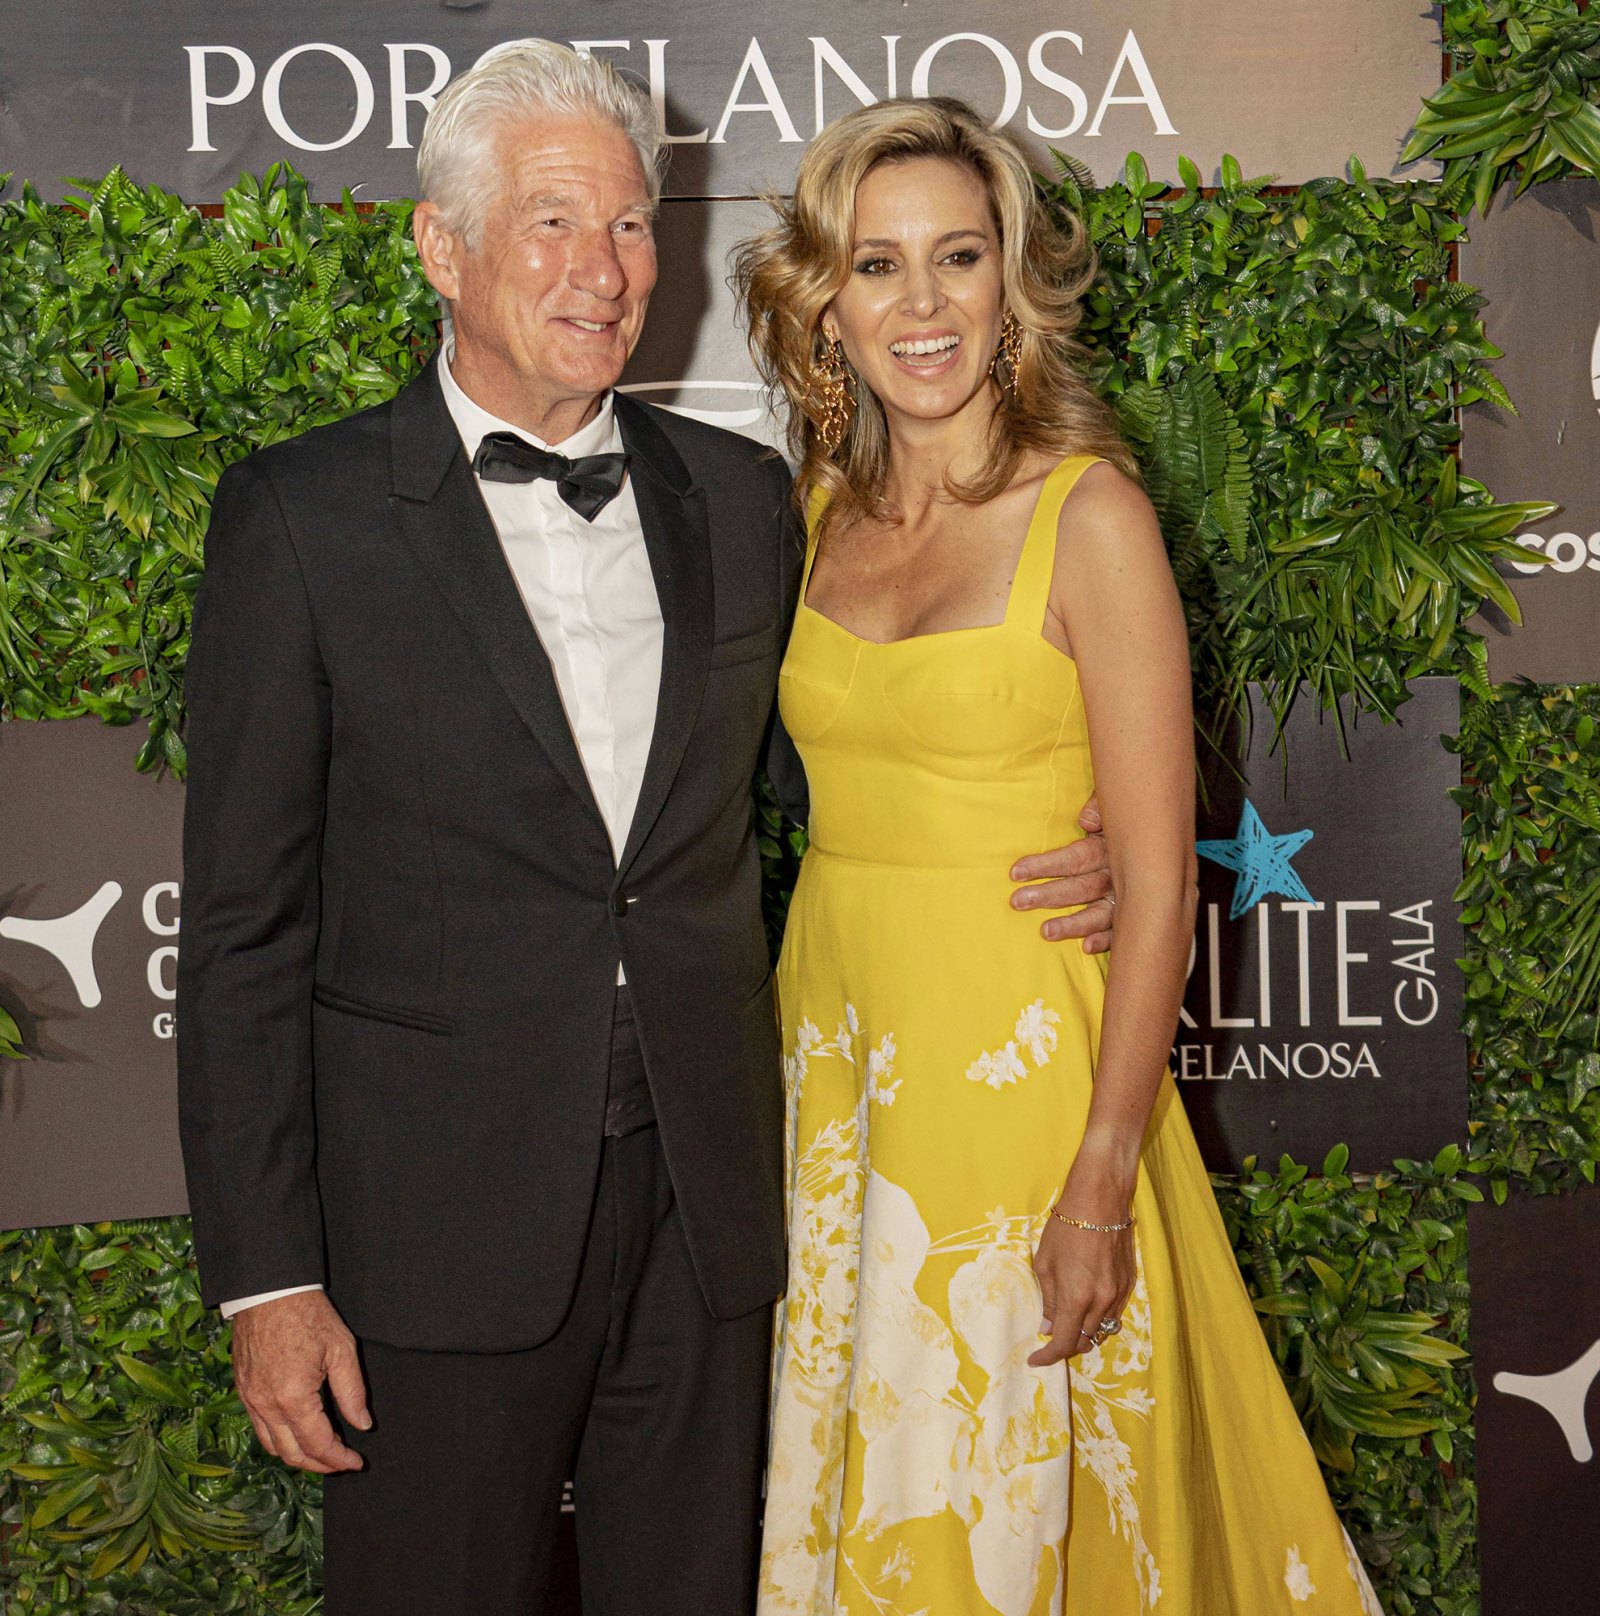 Richard Gere's Sweetest Photos With His 3 Sons, Wife Alejandra Silva Through the Years: Family Album yellow gown